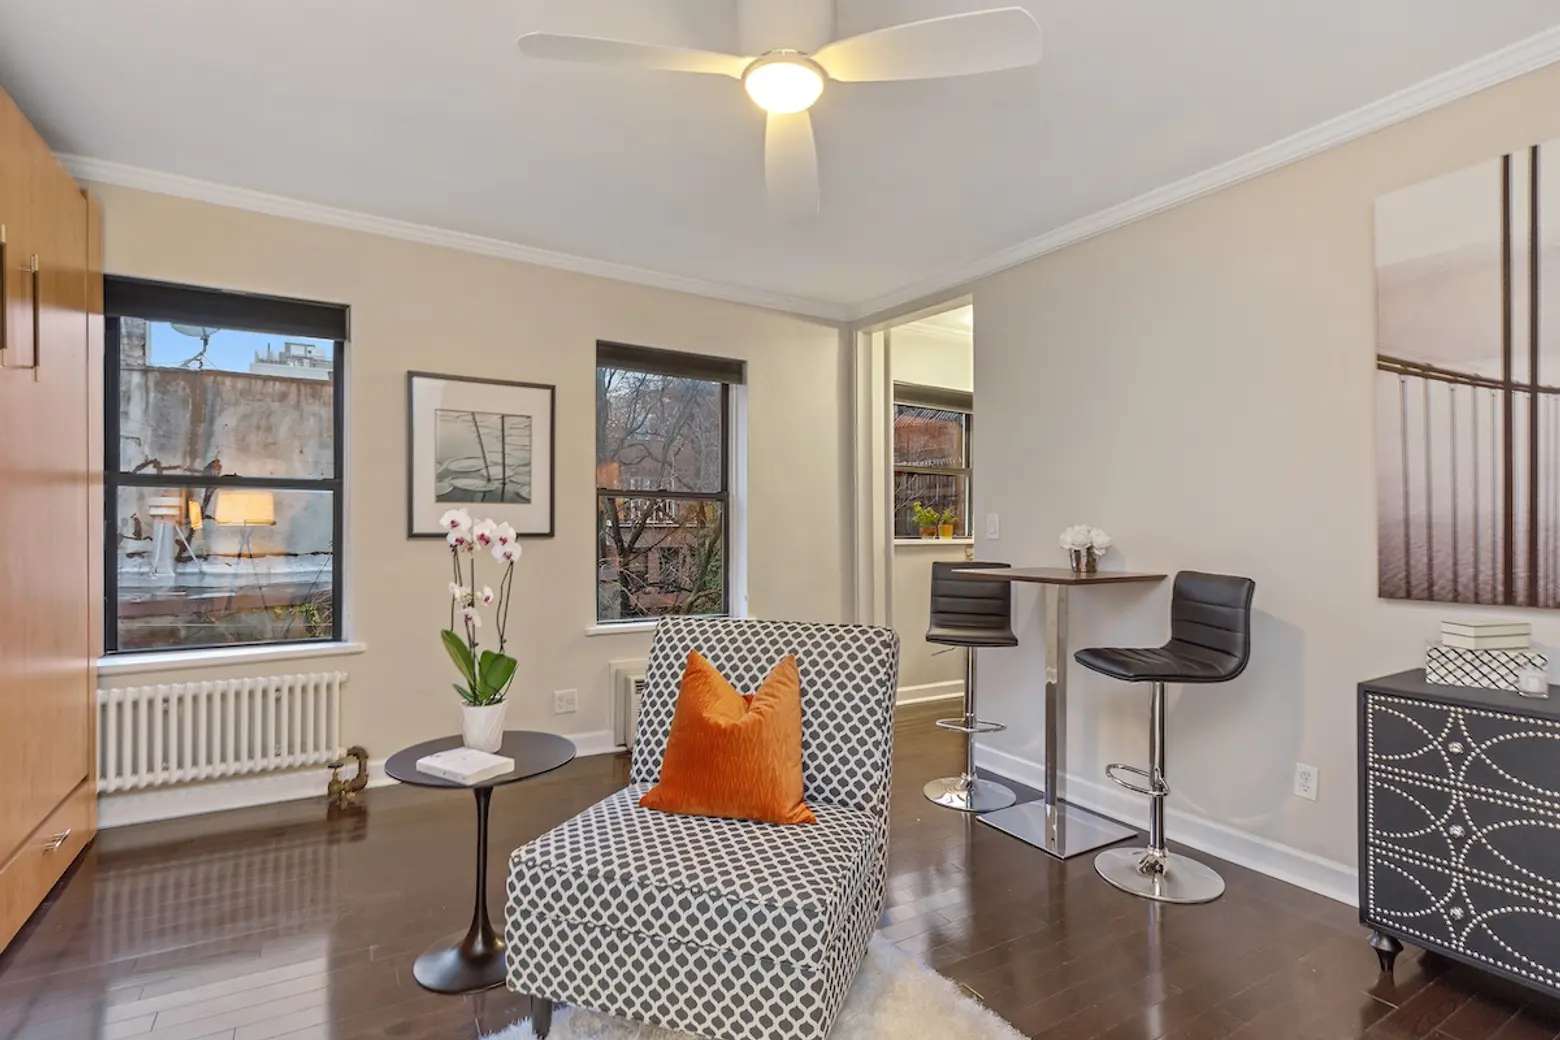 87 St. marks place, east village, cool listings, co-ops